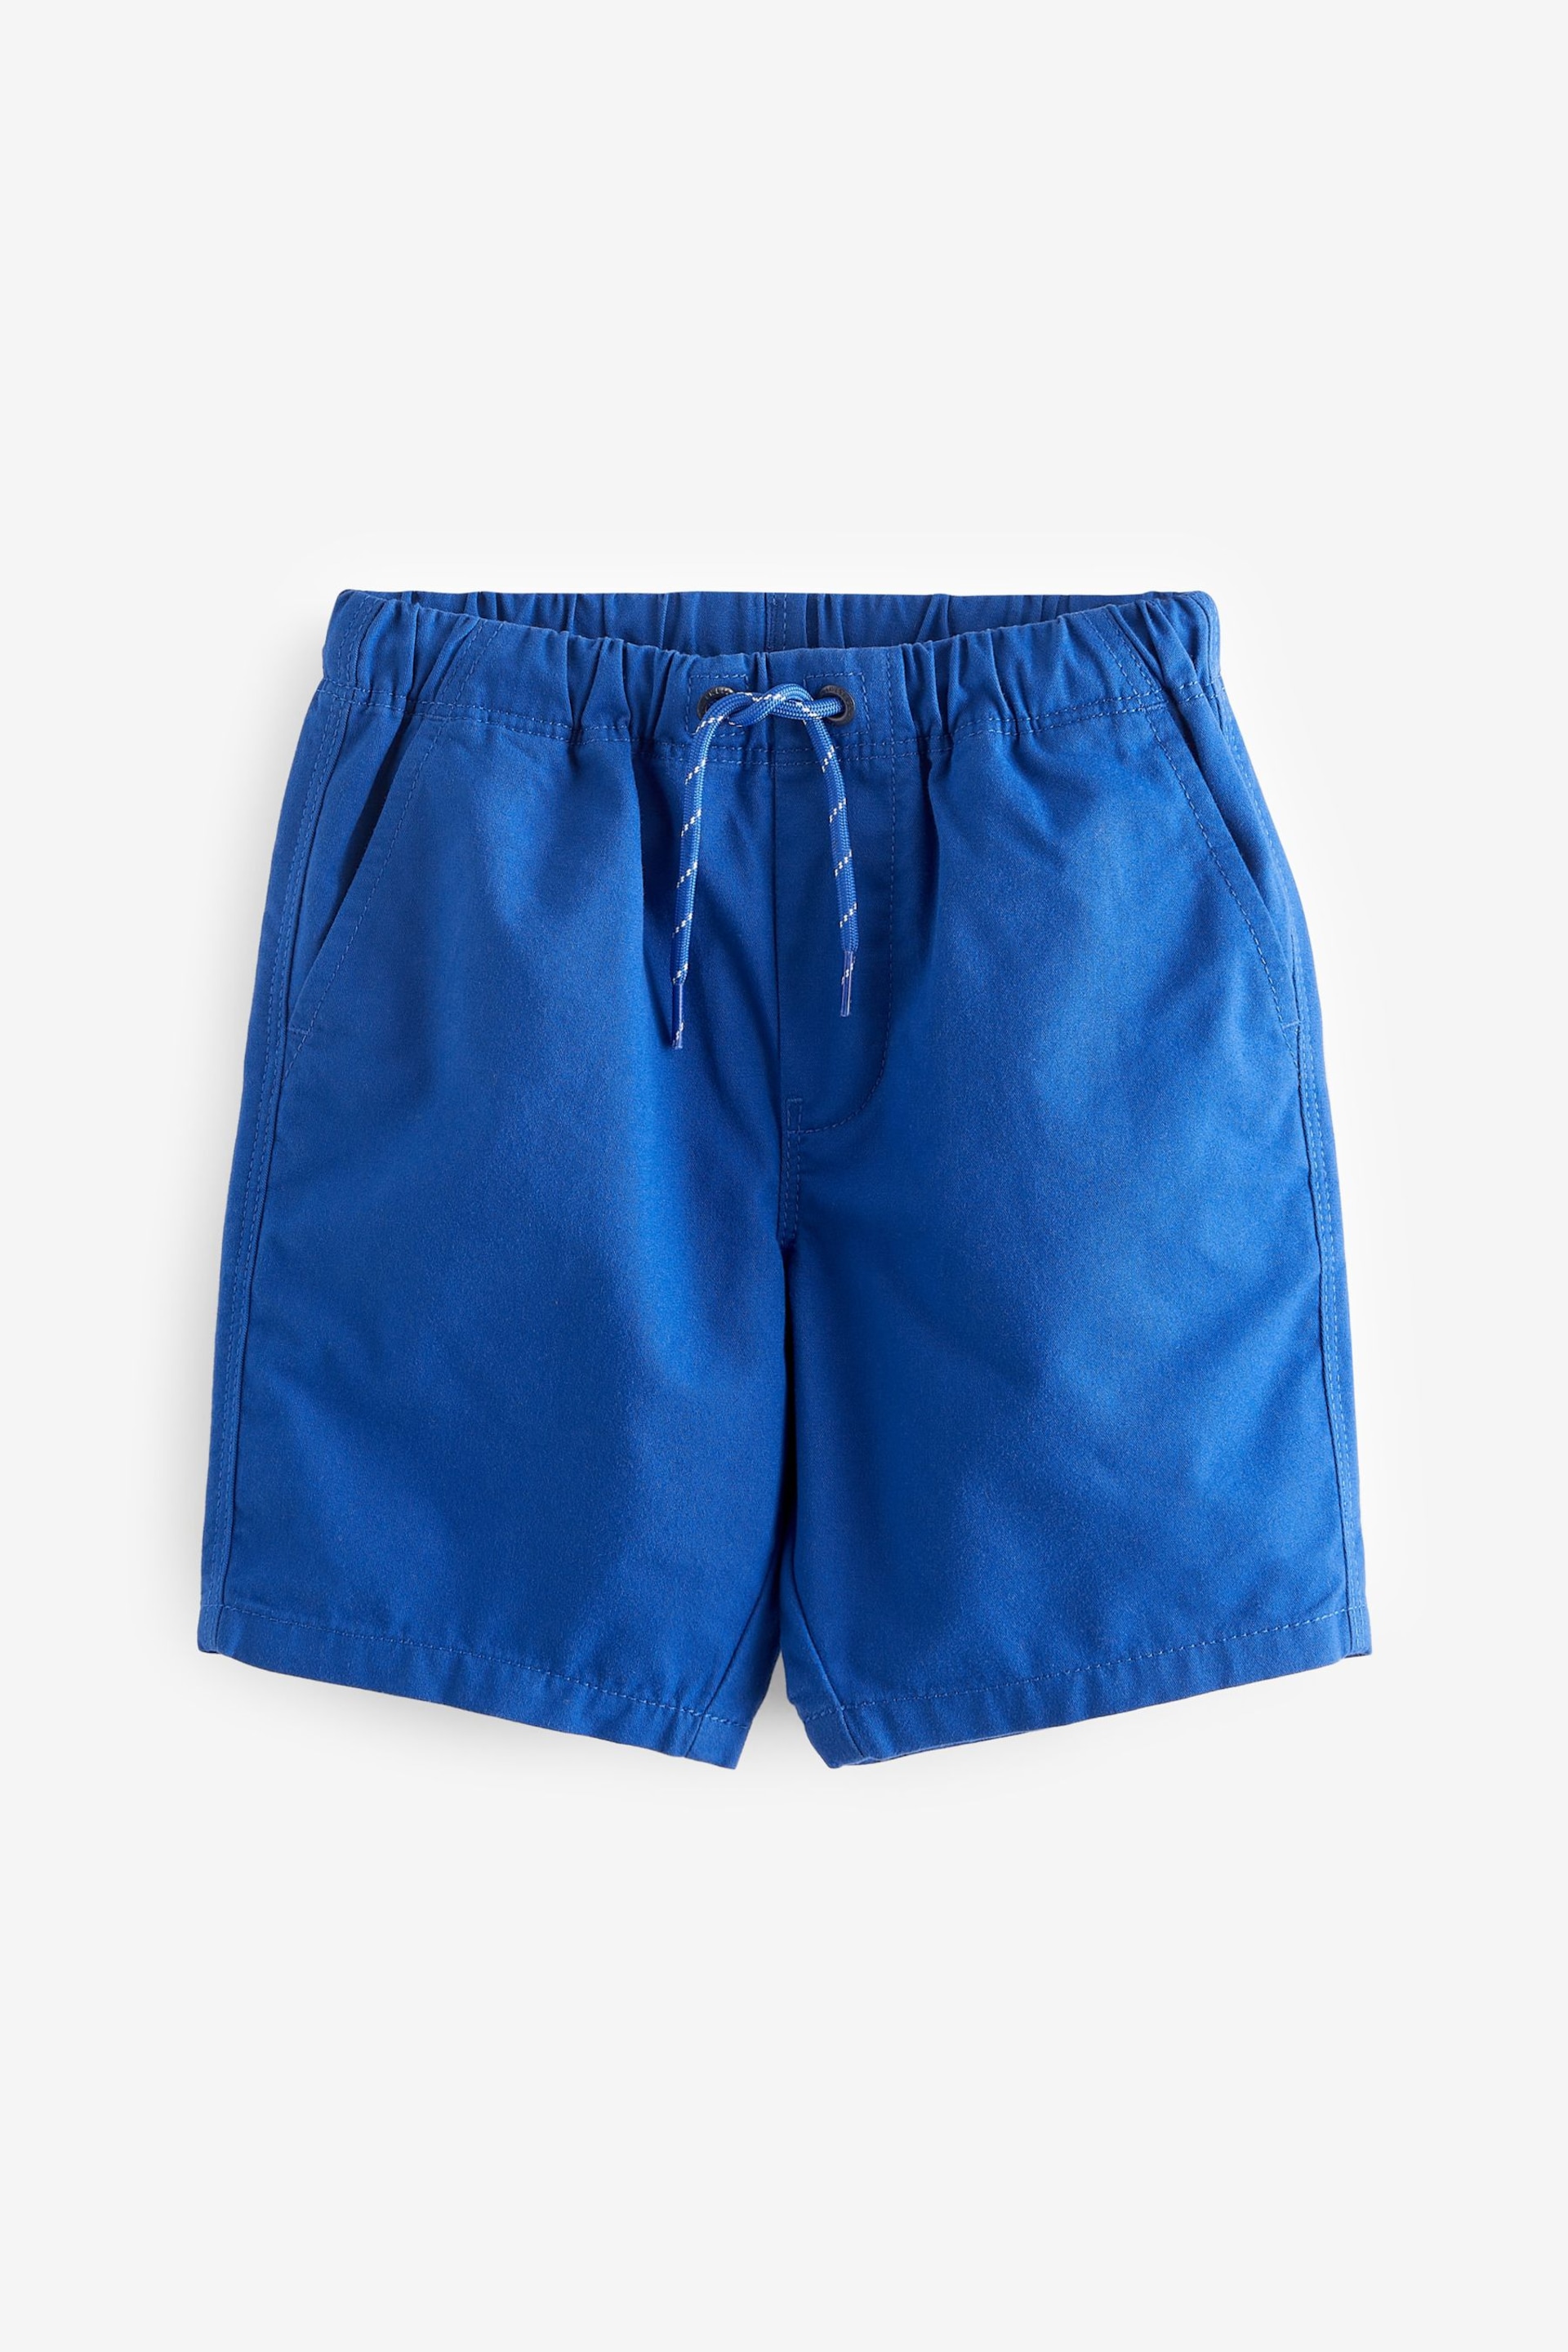 Cobalt Blue Single Pull-On Shorts (3-16yrs) - Image 1 of 3